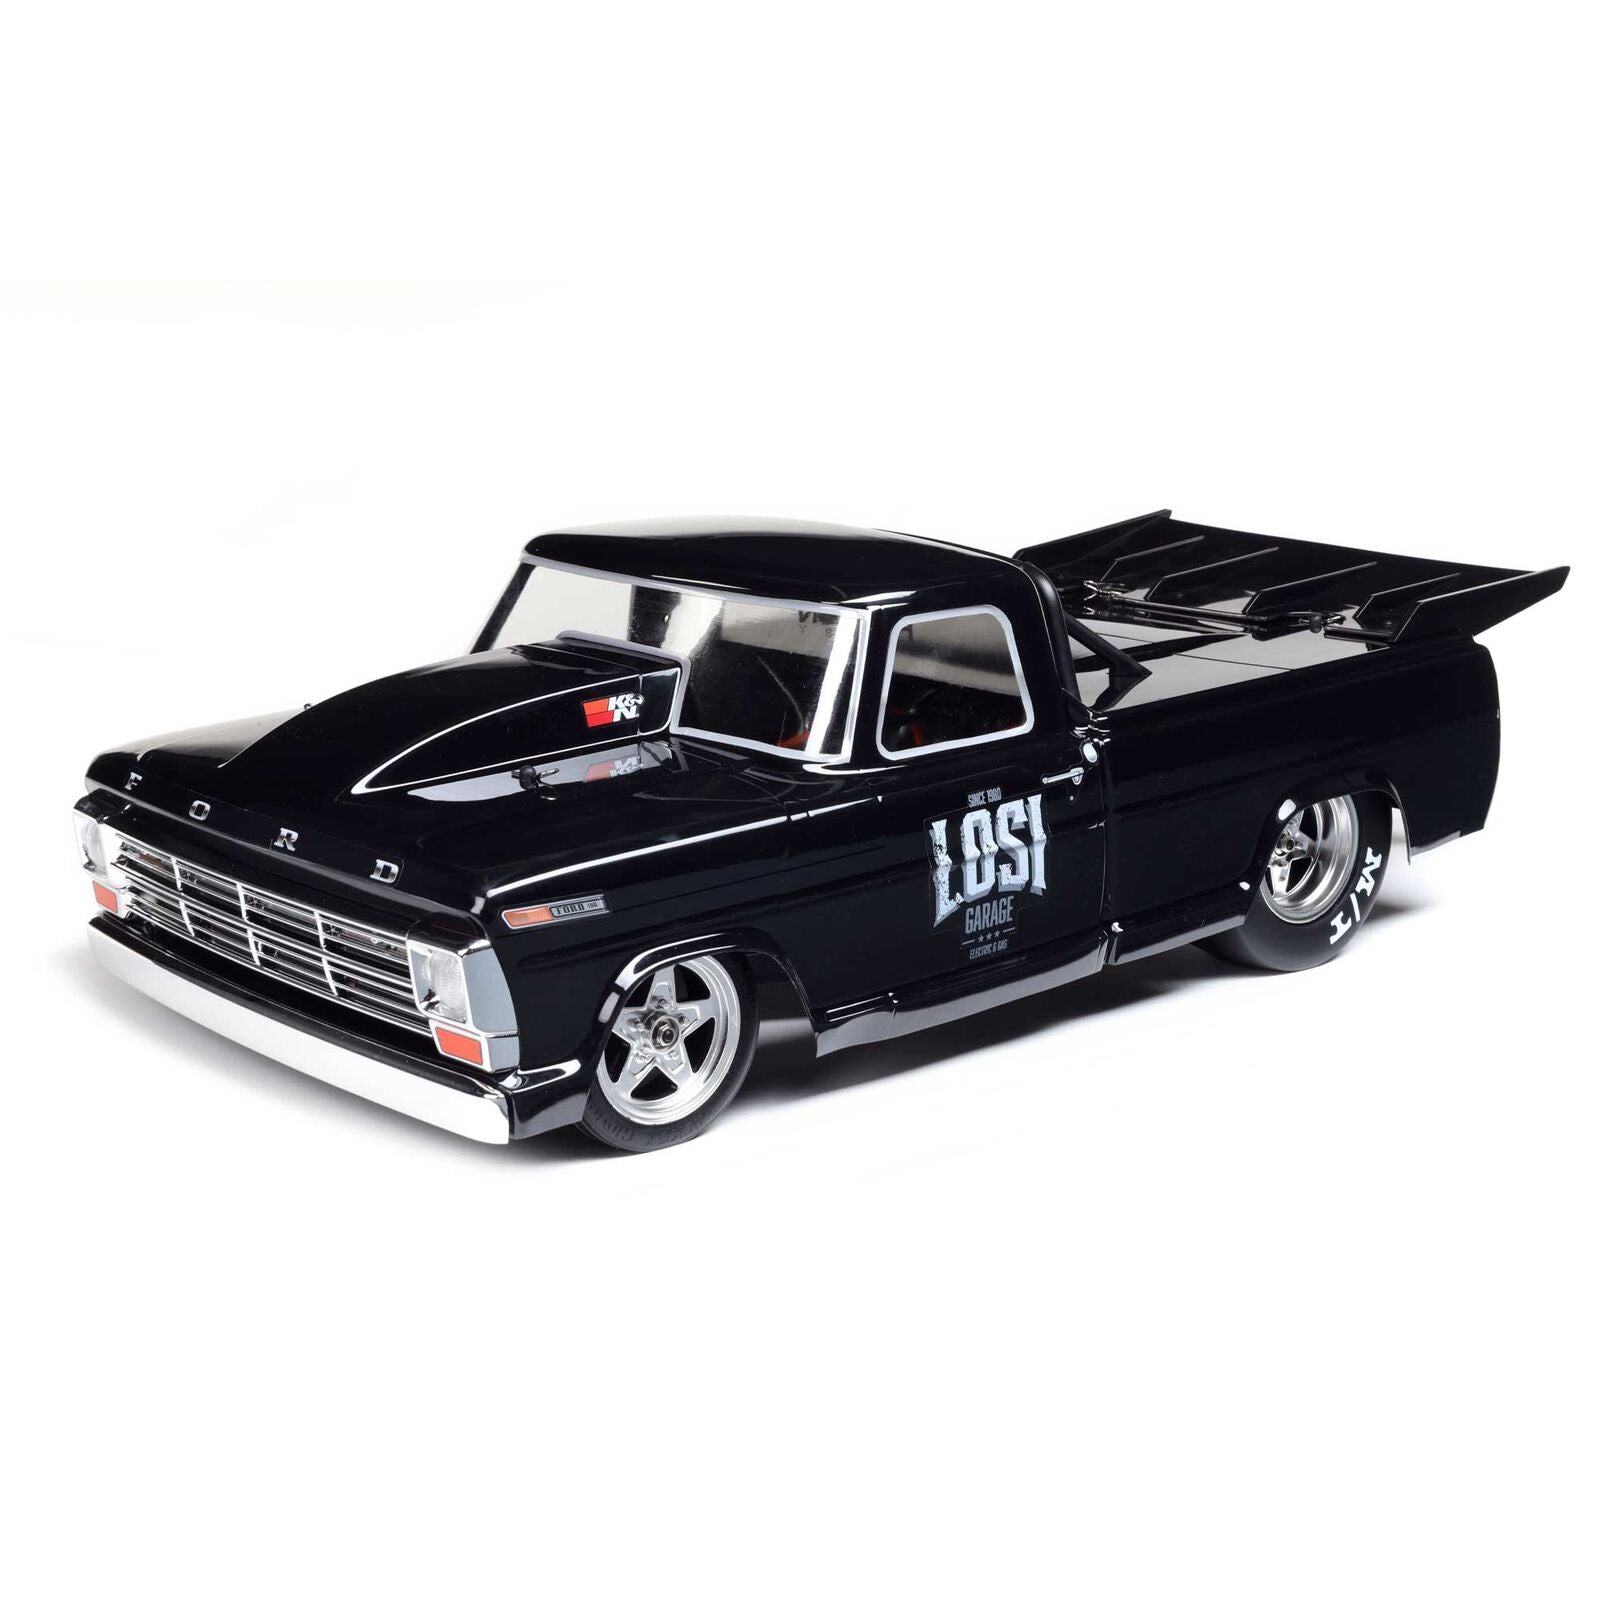 LOSI LOS03045 1/10 '68 Ford F100 22S 2WD No Prep Drag Truck Brushless RTR